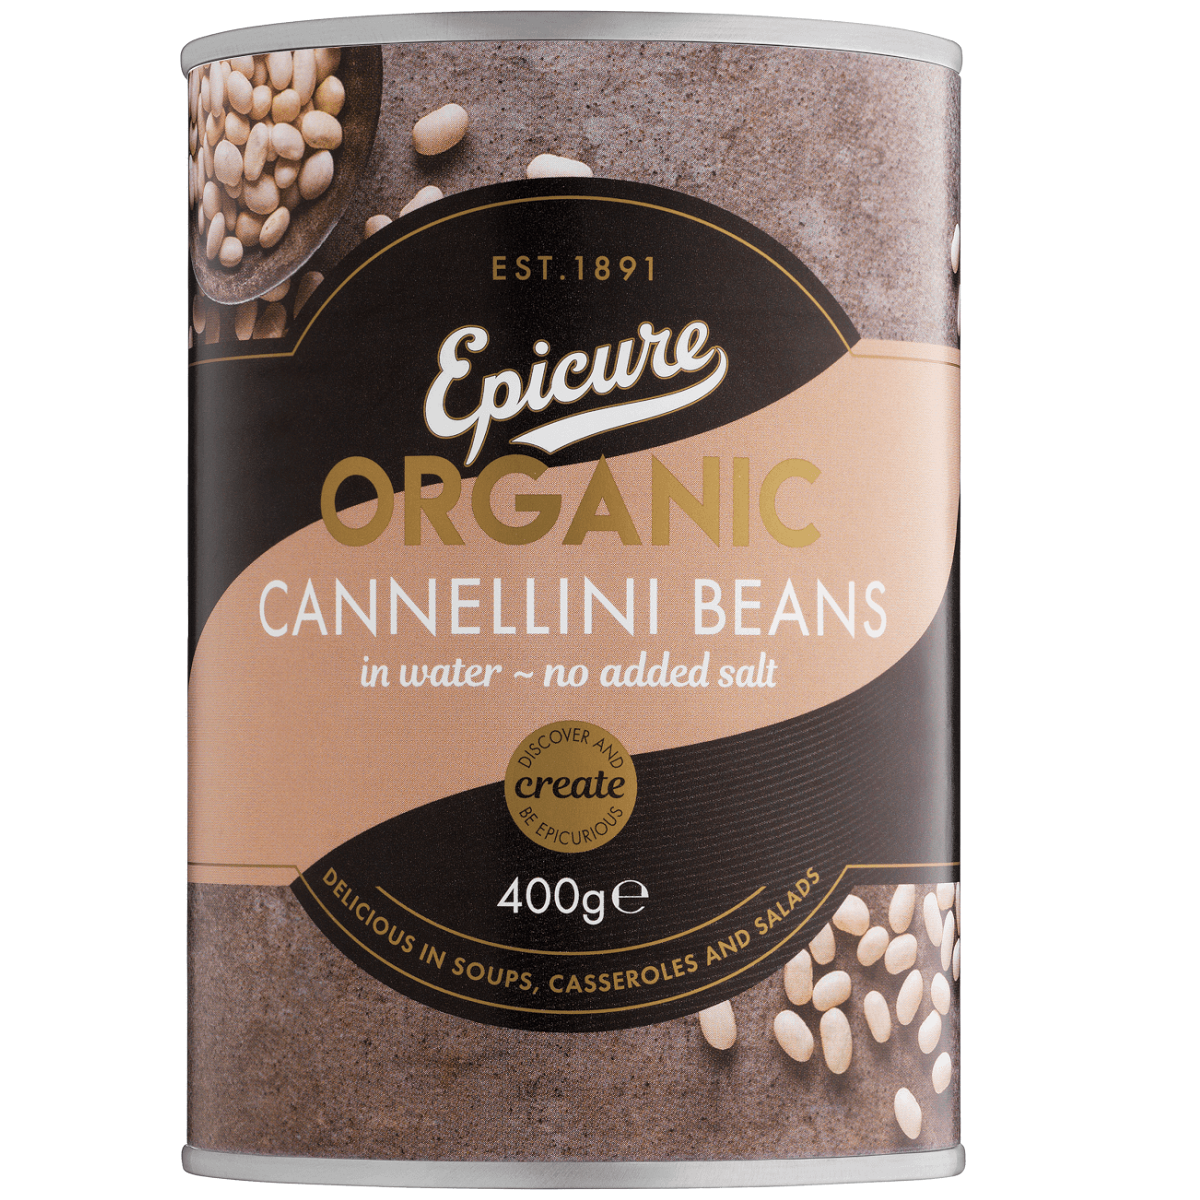 Epicure Organic Cannellini Beans in water no added salt 400g